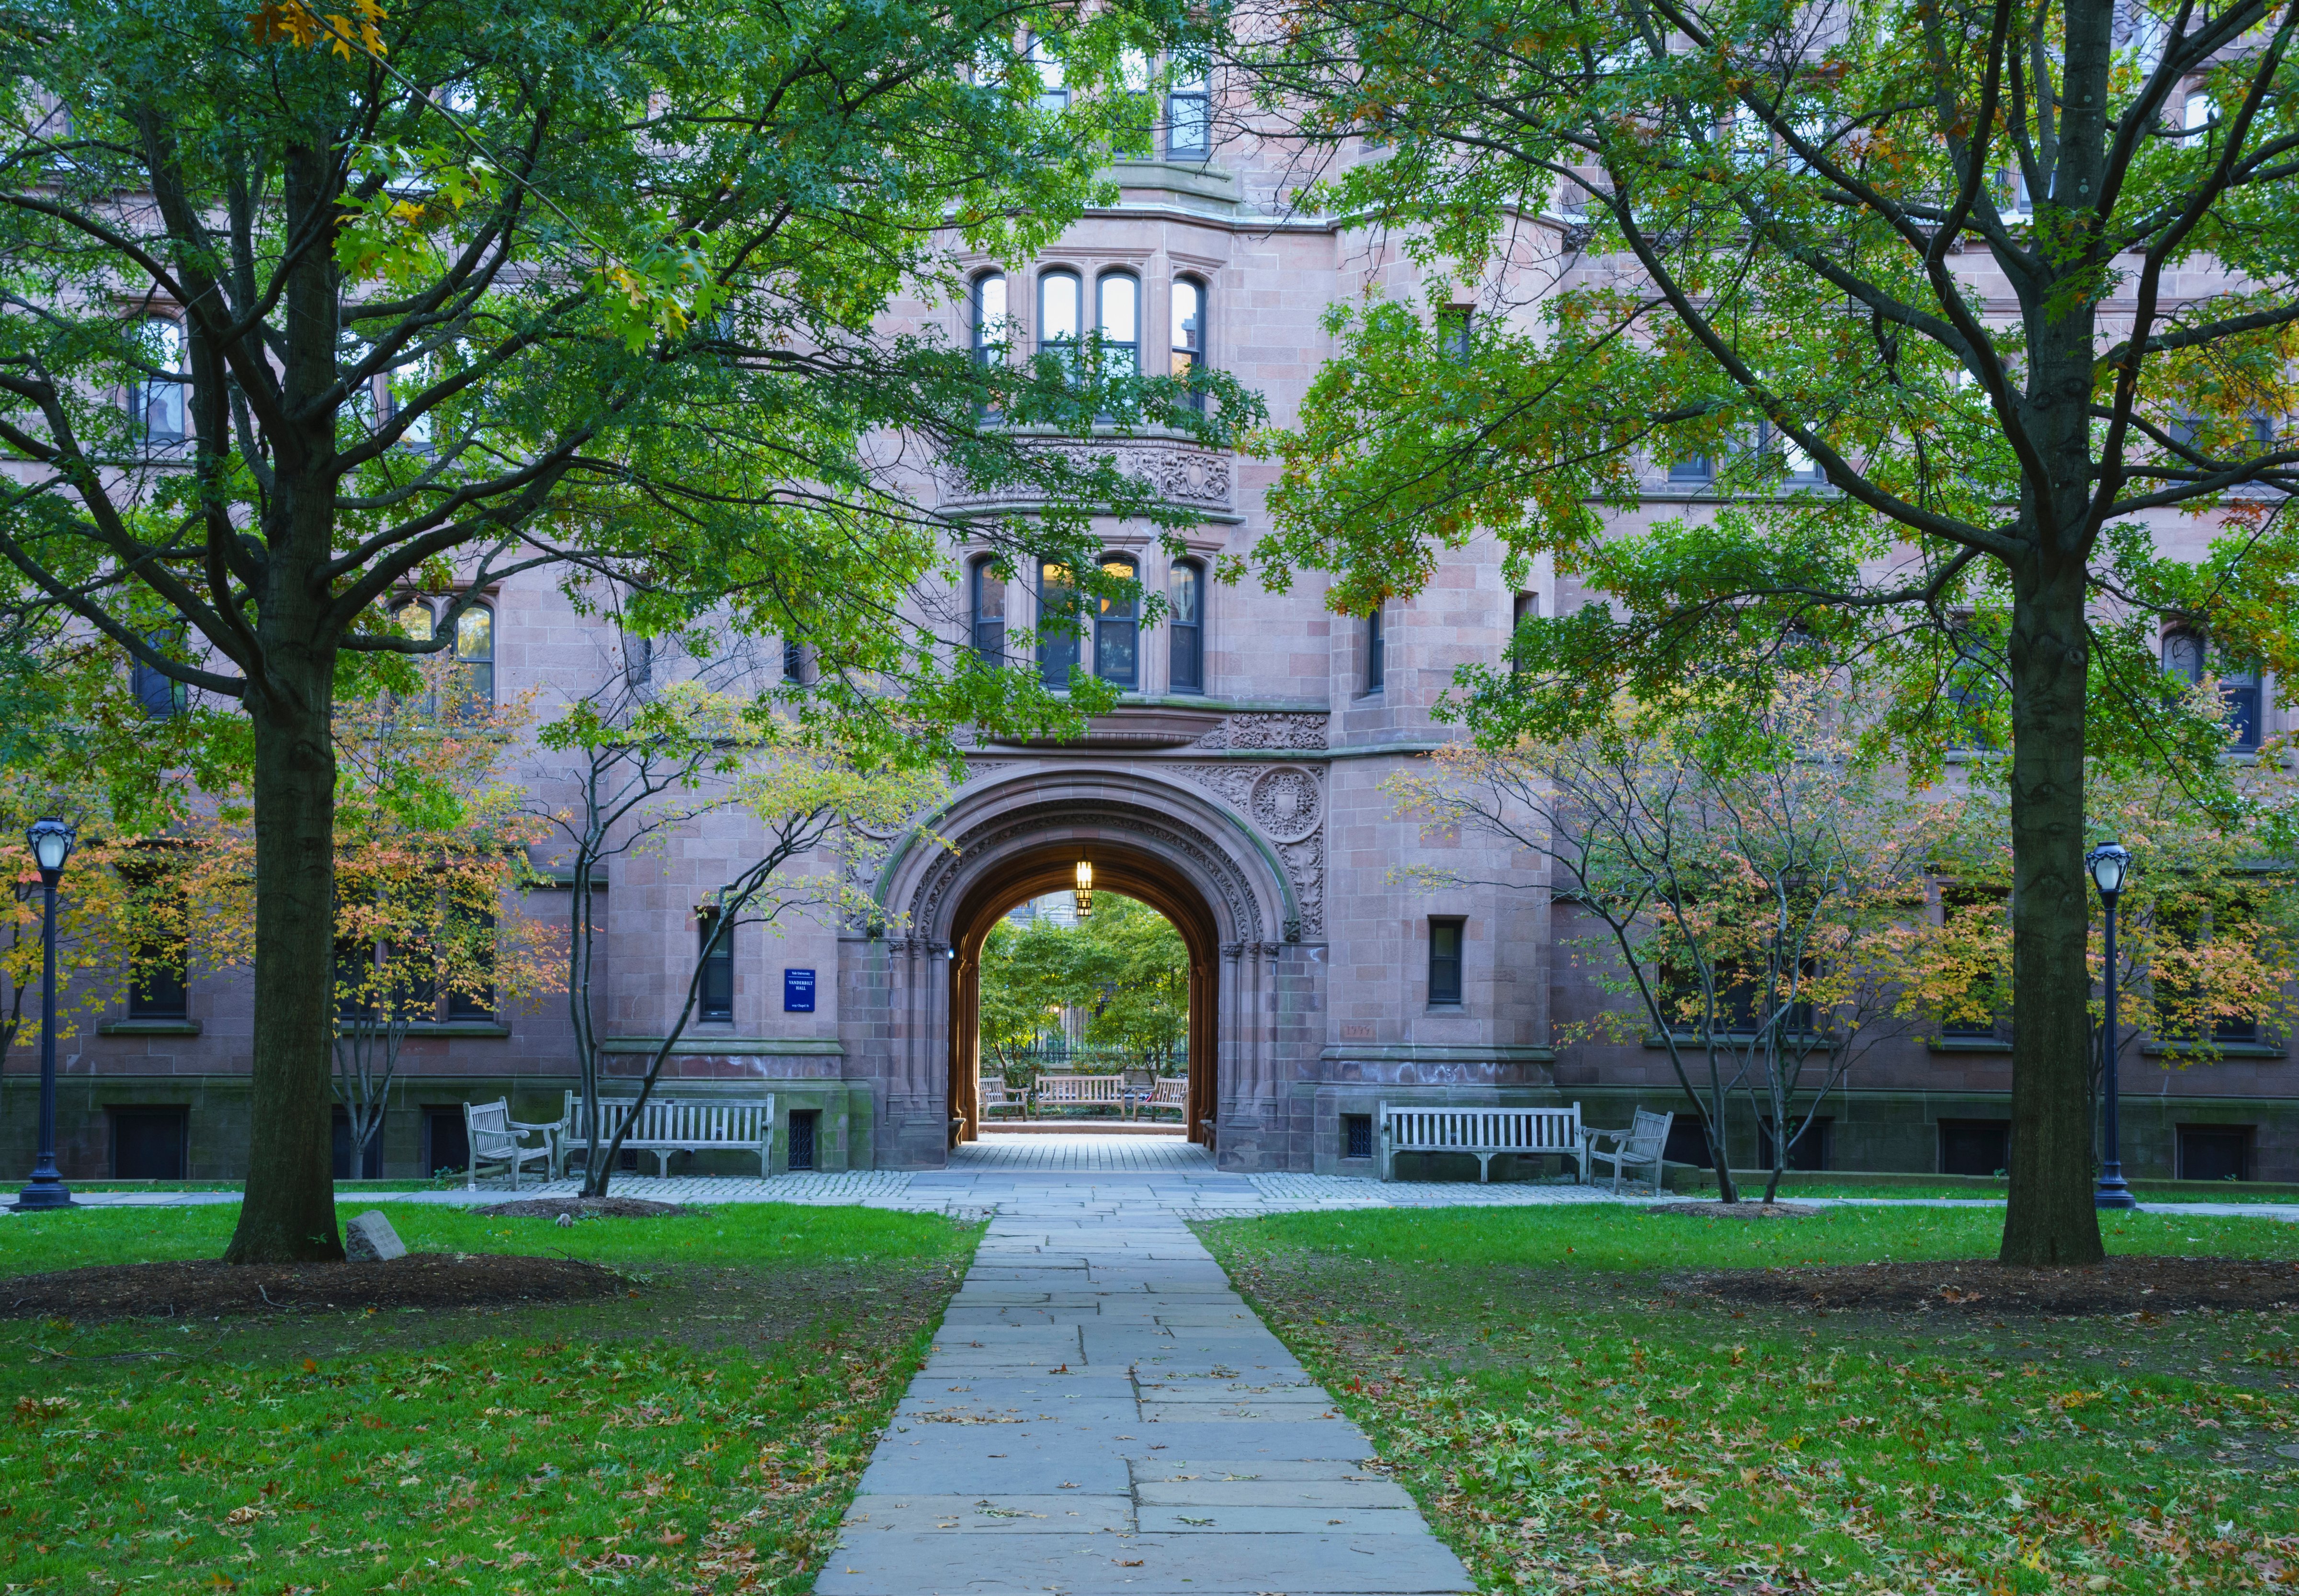 Yale University,New Haven County,Connecticut,Usa (Topic Images Inc.&mdash;Getty Images/Topic Images)